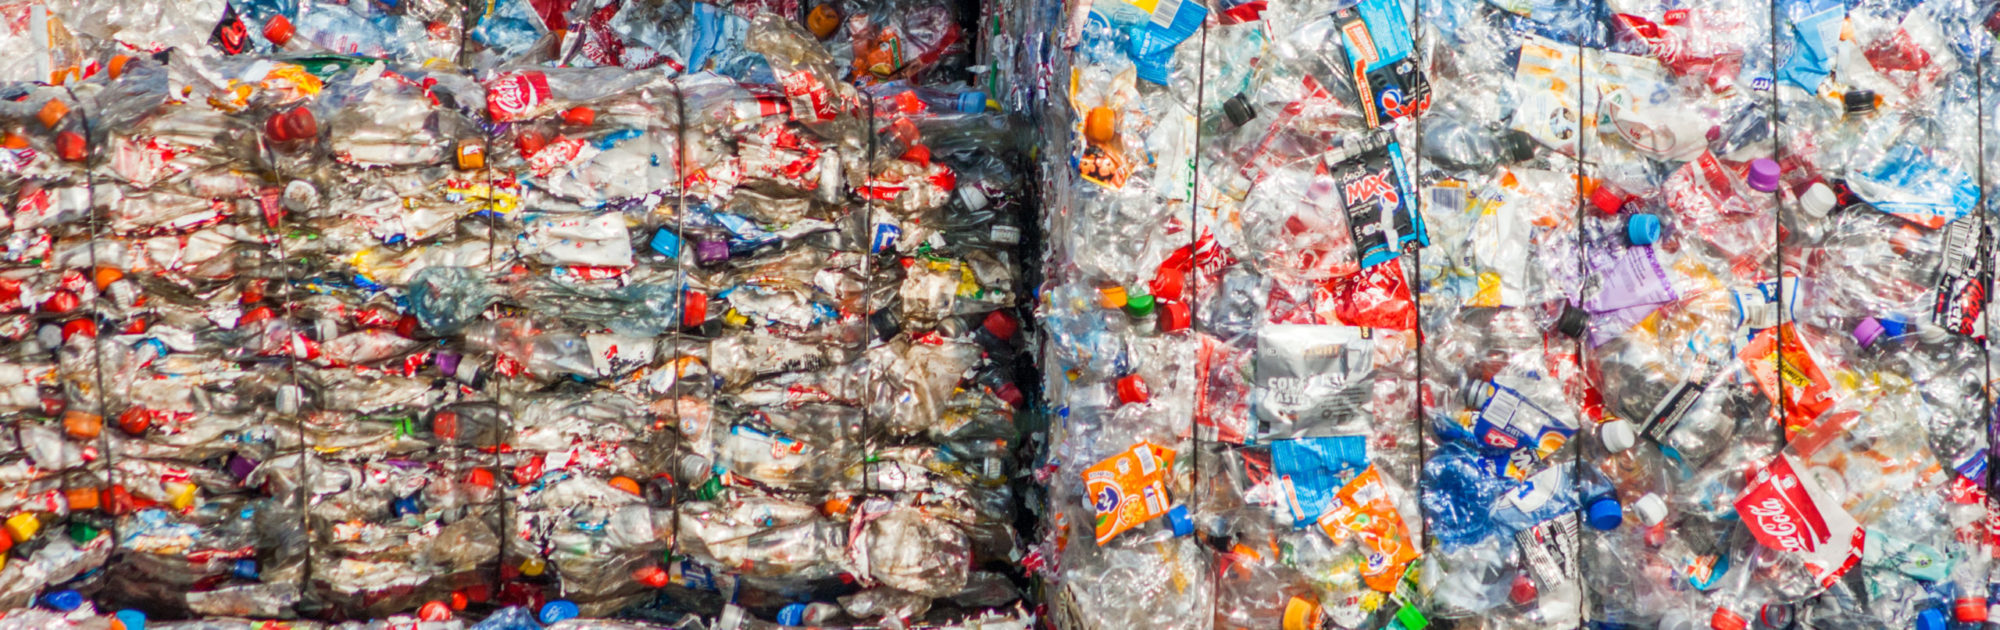 Reforms in Chinese policy cost have cost the recycling industry thousands, but new opportunities have emerged.